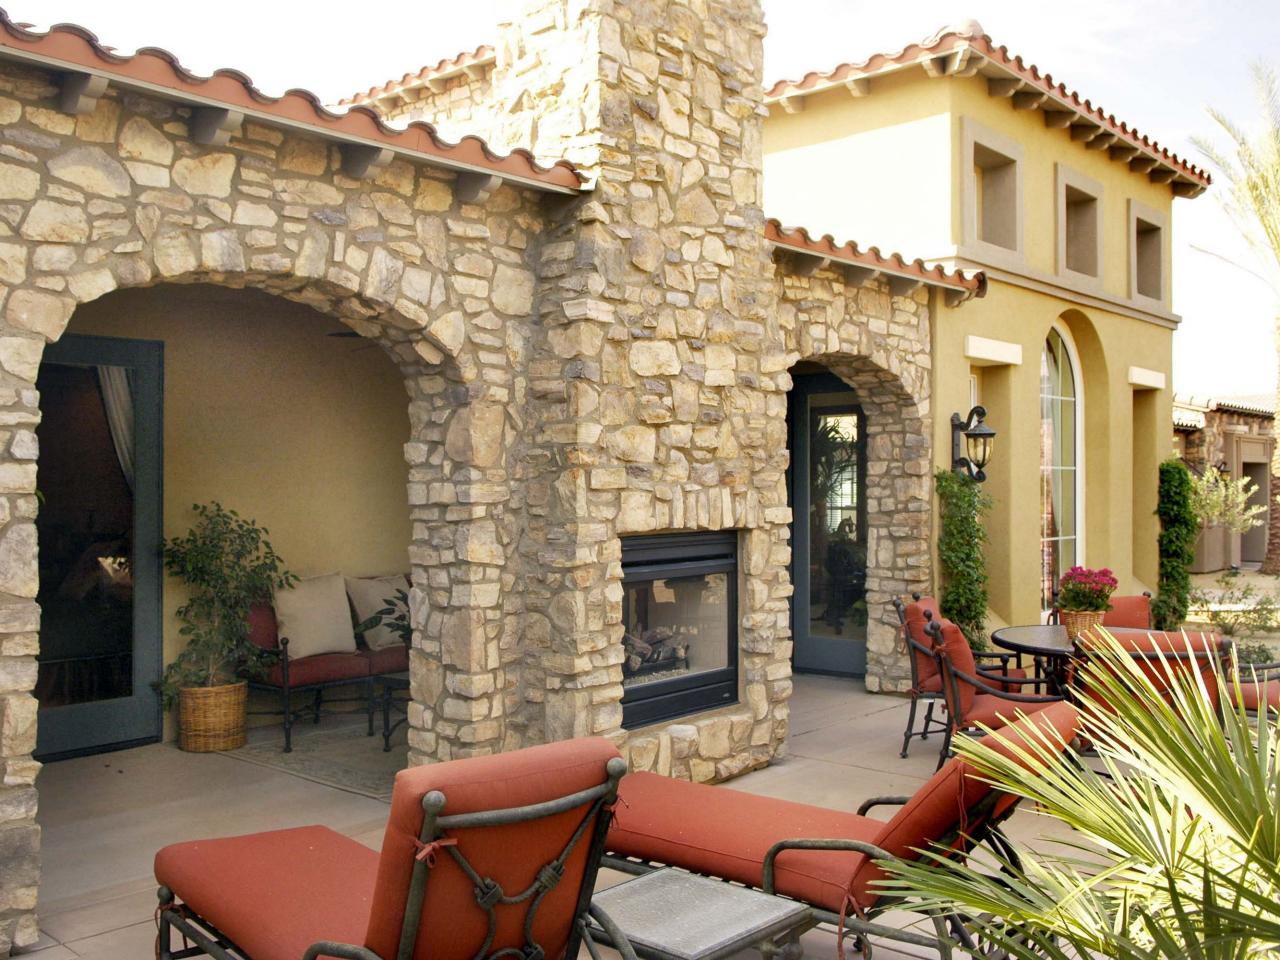 Investigate how to plan for building an outdoor fireplace